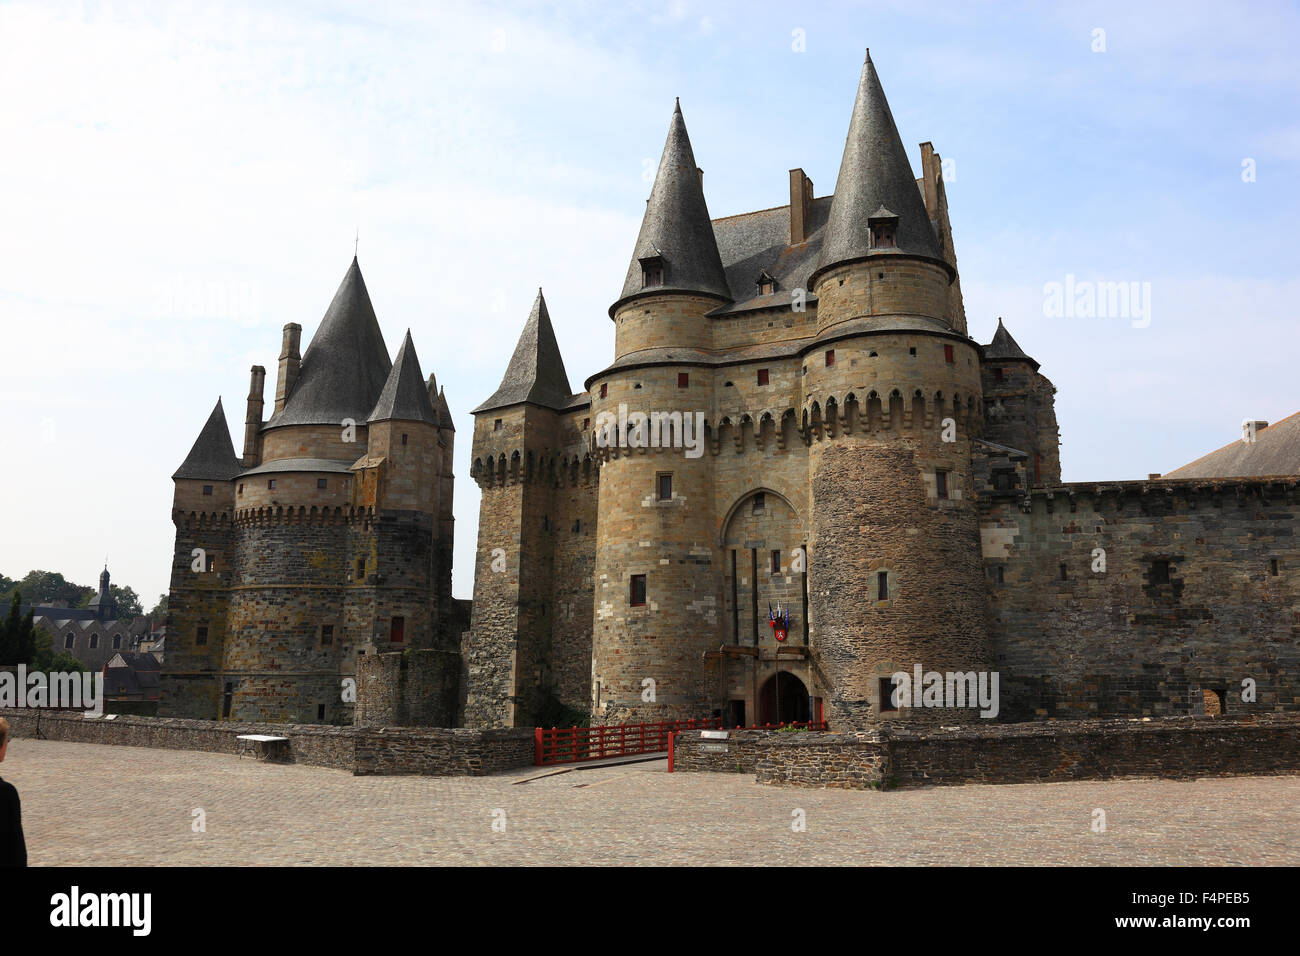 France, Brittany, the medieval castle of Vitre Stock Photo